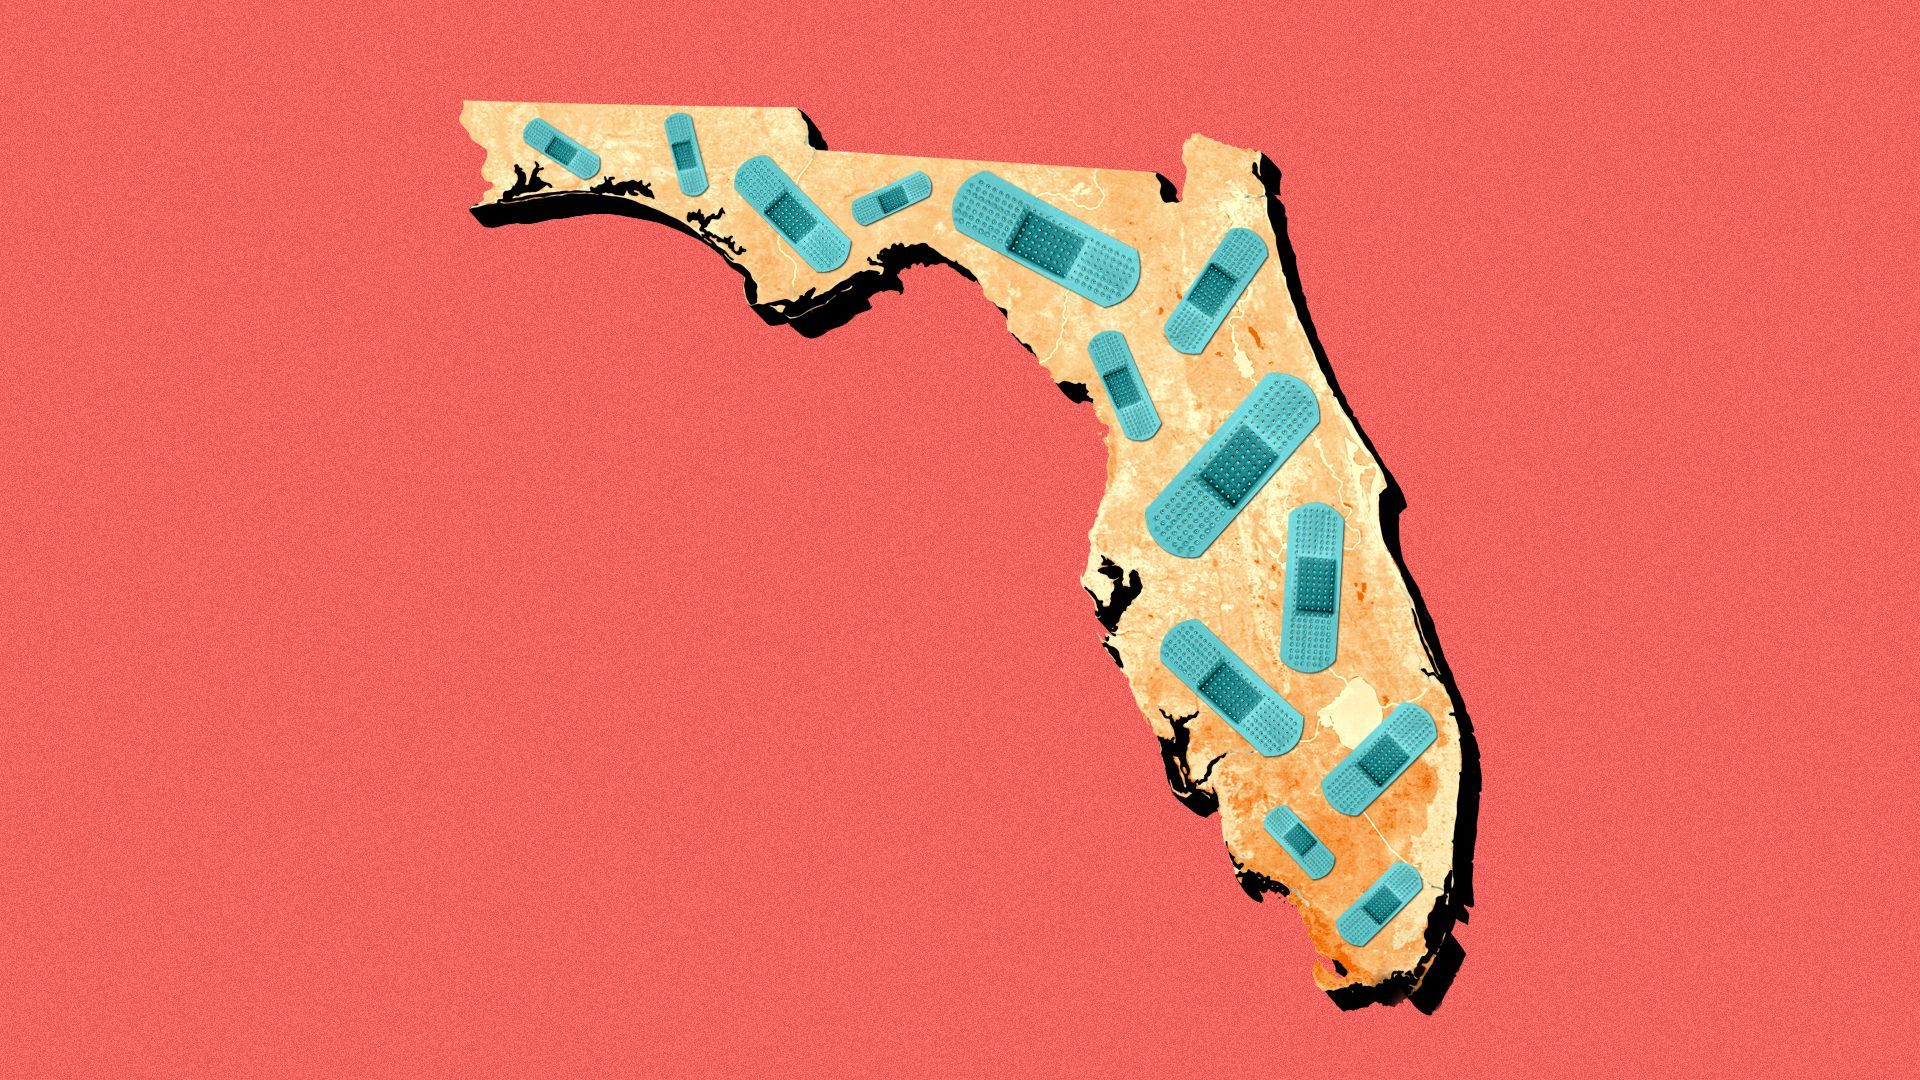 Illustration of the state of Florida covered in bandages.